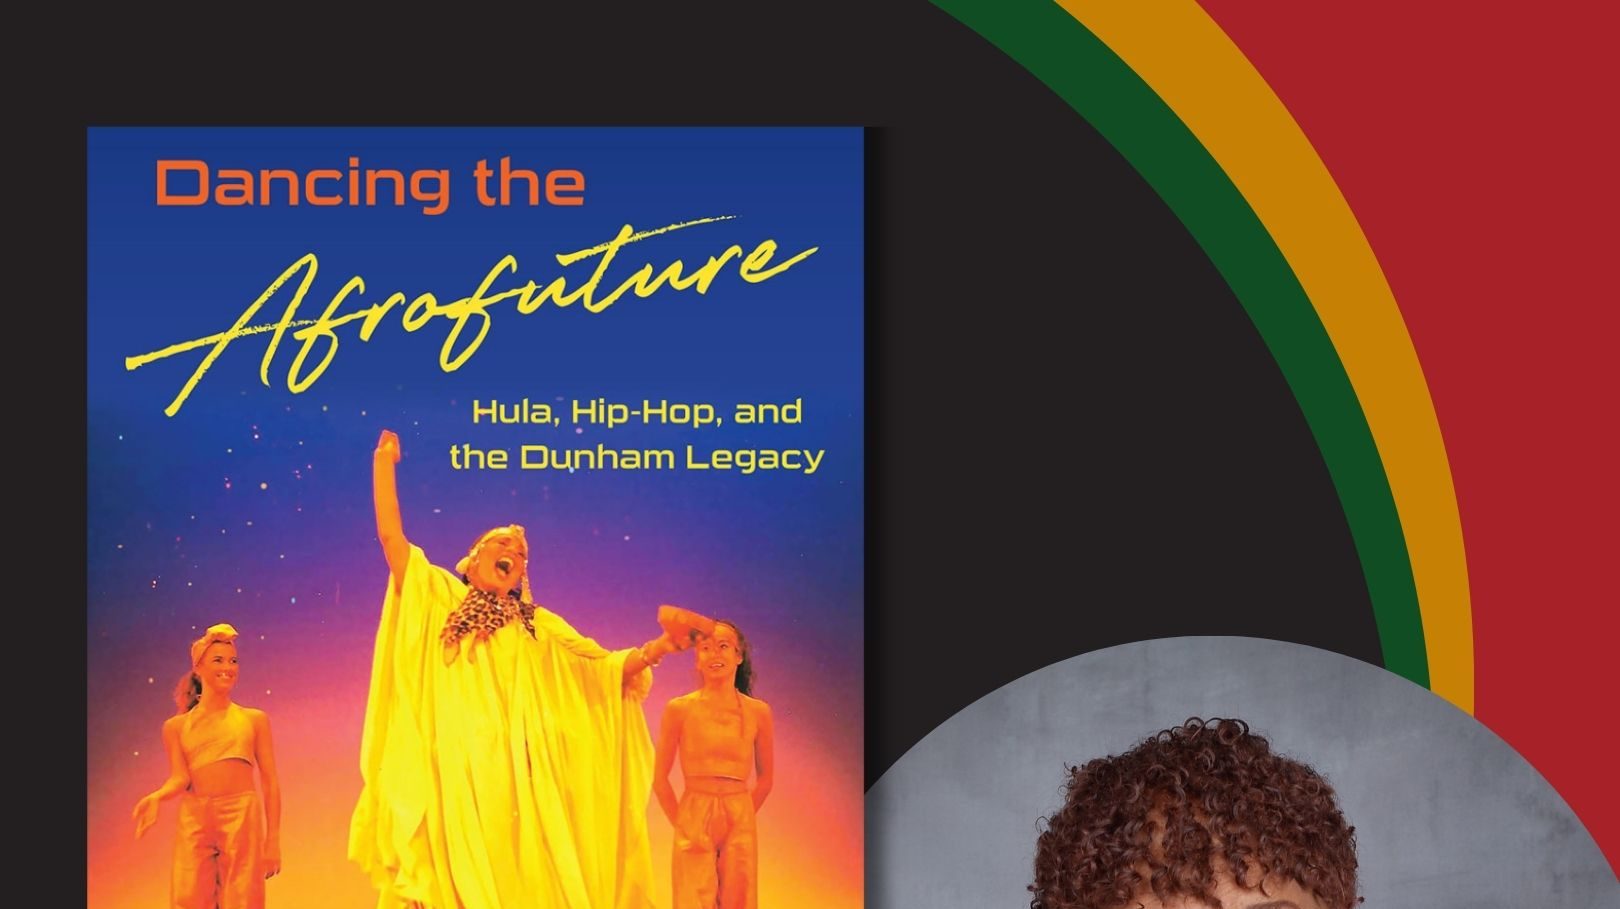 "Dancing the Afrofuture" San Francisco Book Launch and Reading